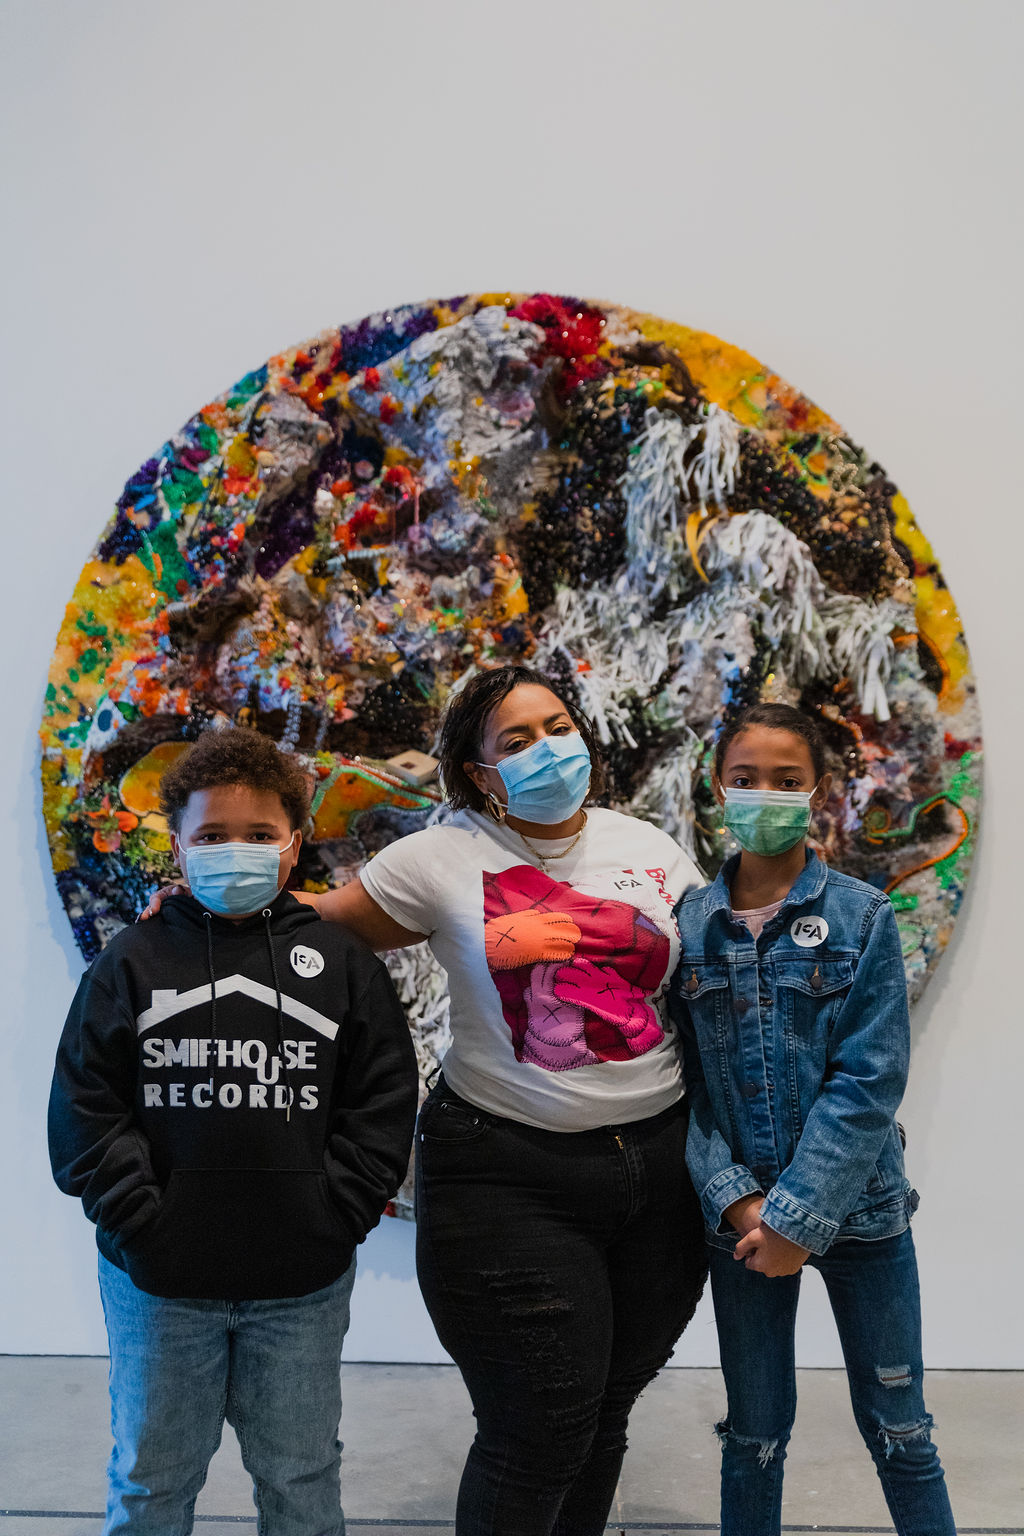 A mother and her two children pose for a photo in front of a large round, multicolored and textured collage